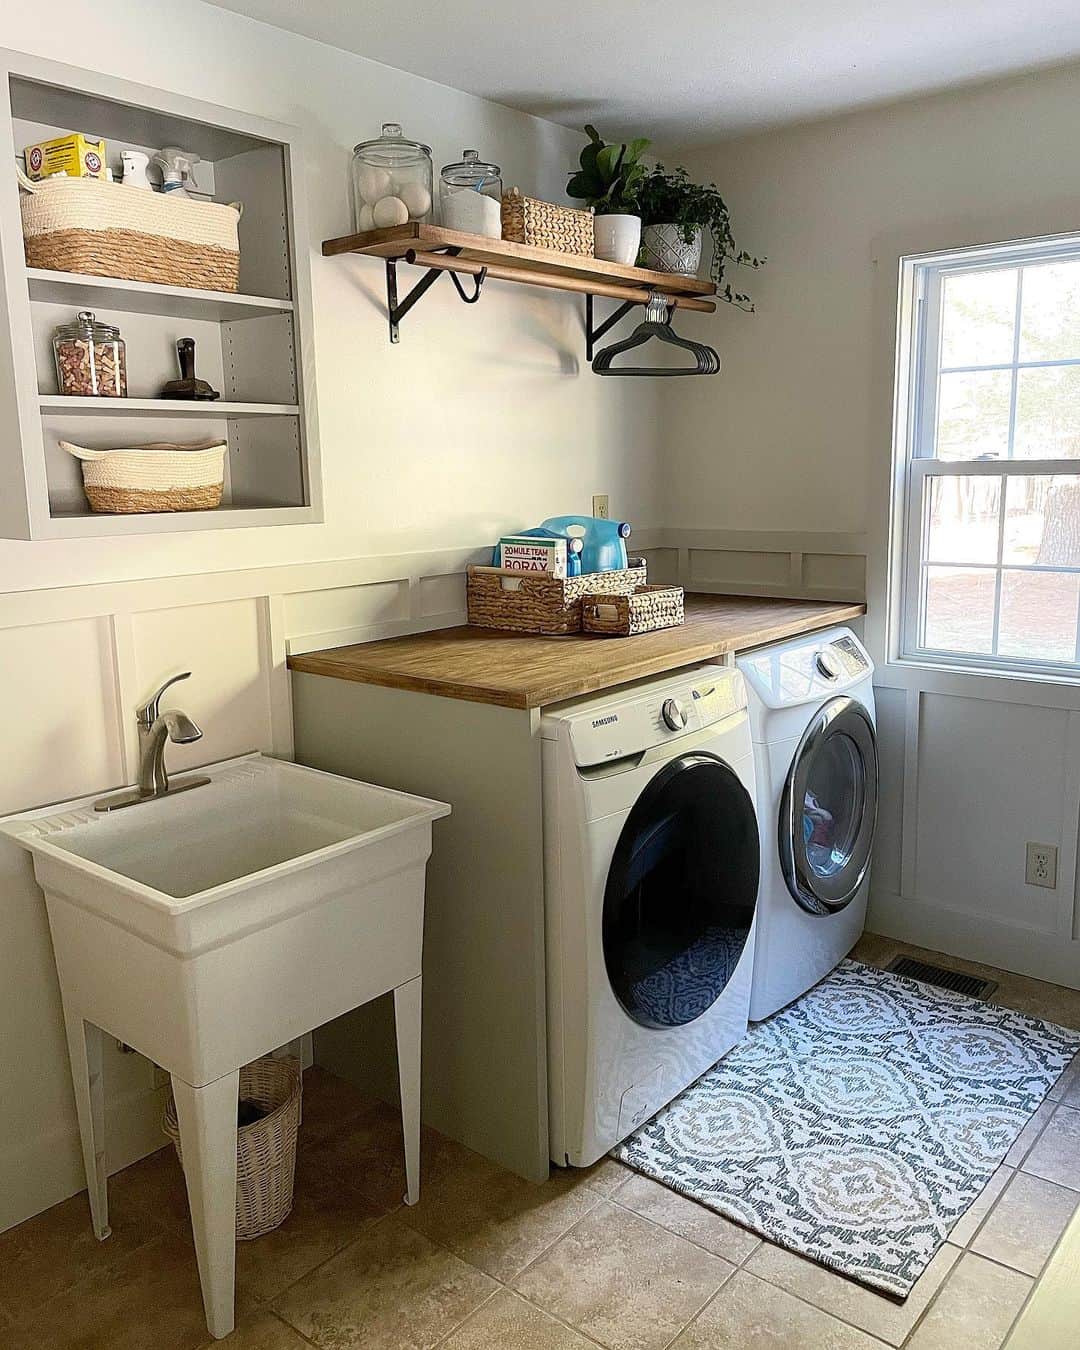 Wooden Countertop Over Laundry Room Appliances - Soul & Lane